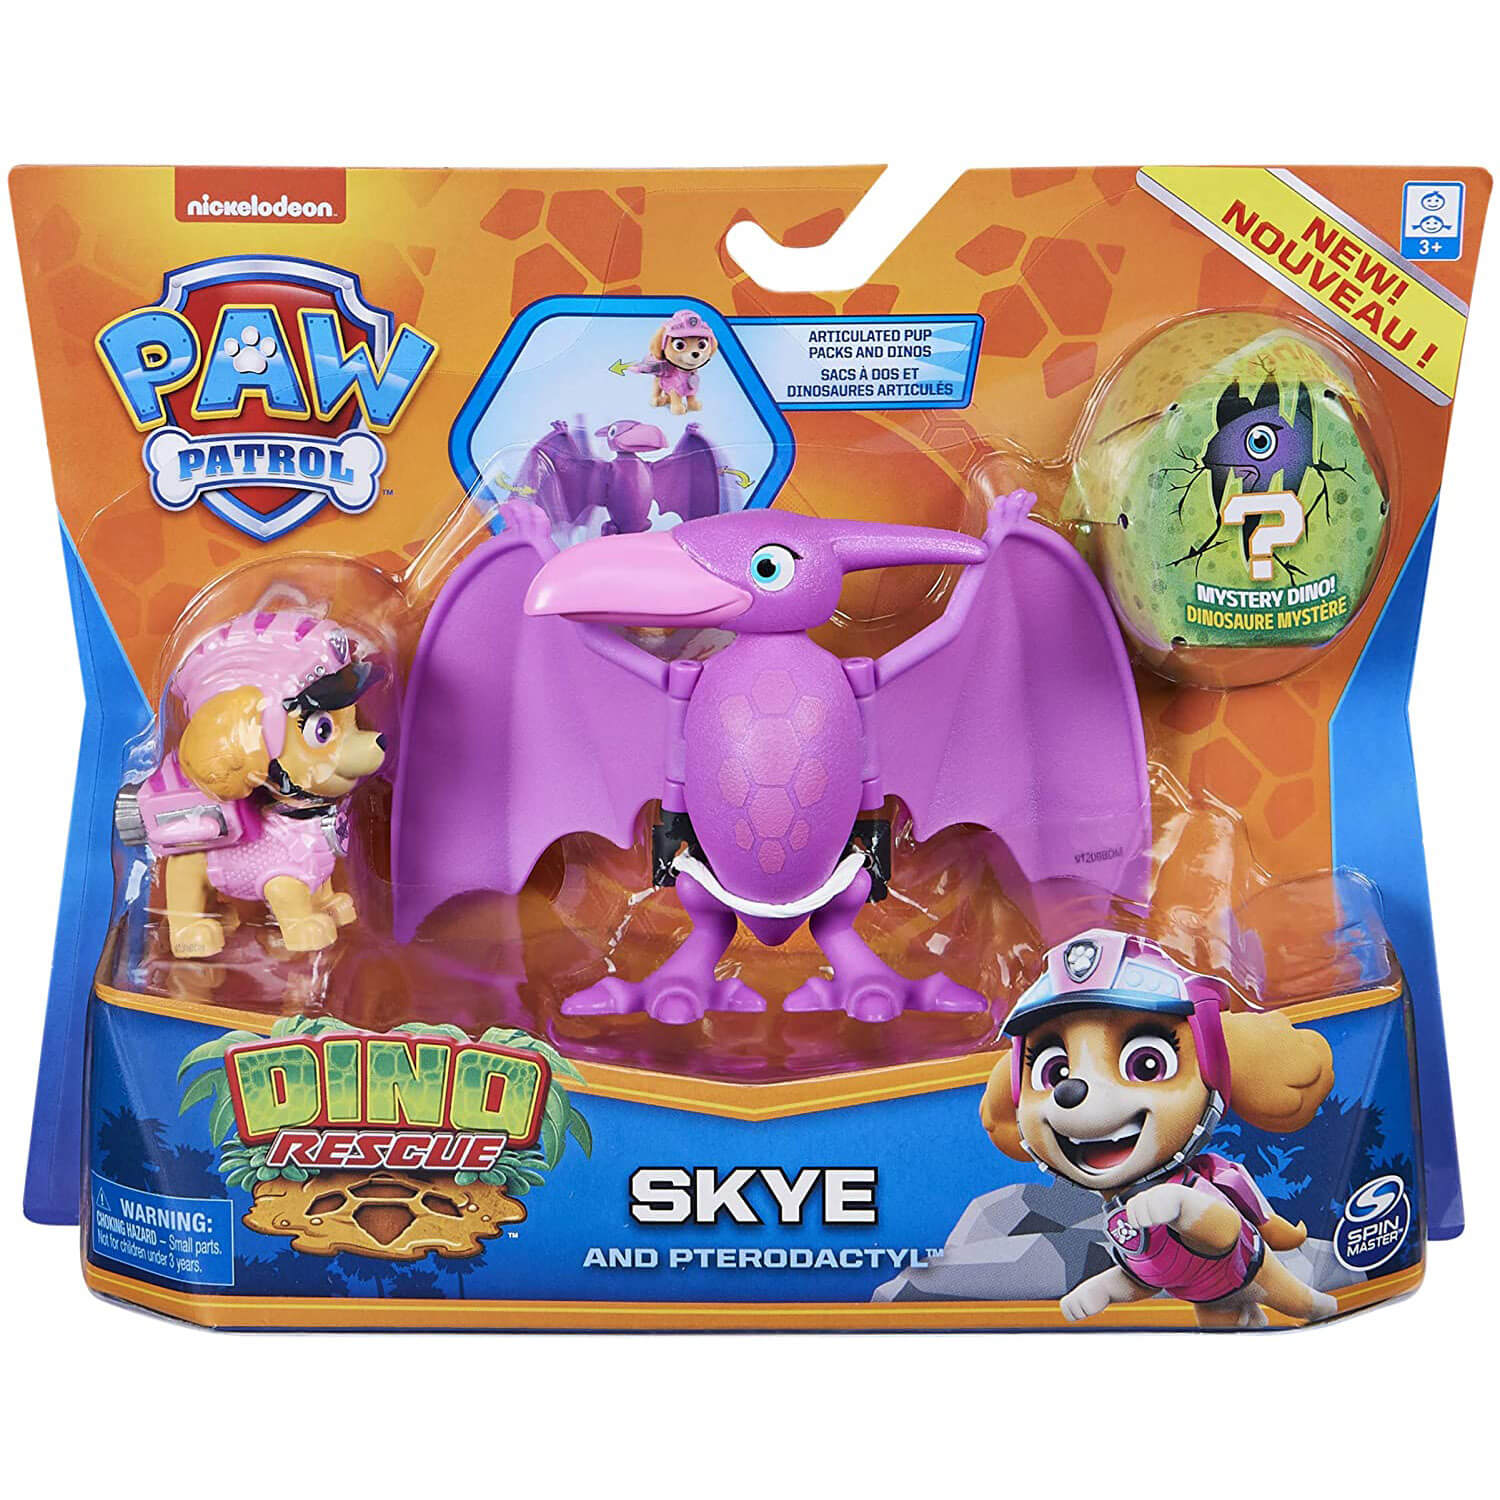 Spin Master PAW Patrol Dino Rescue Skye and Pterodactyl Action Figure Set